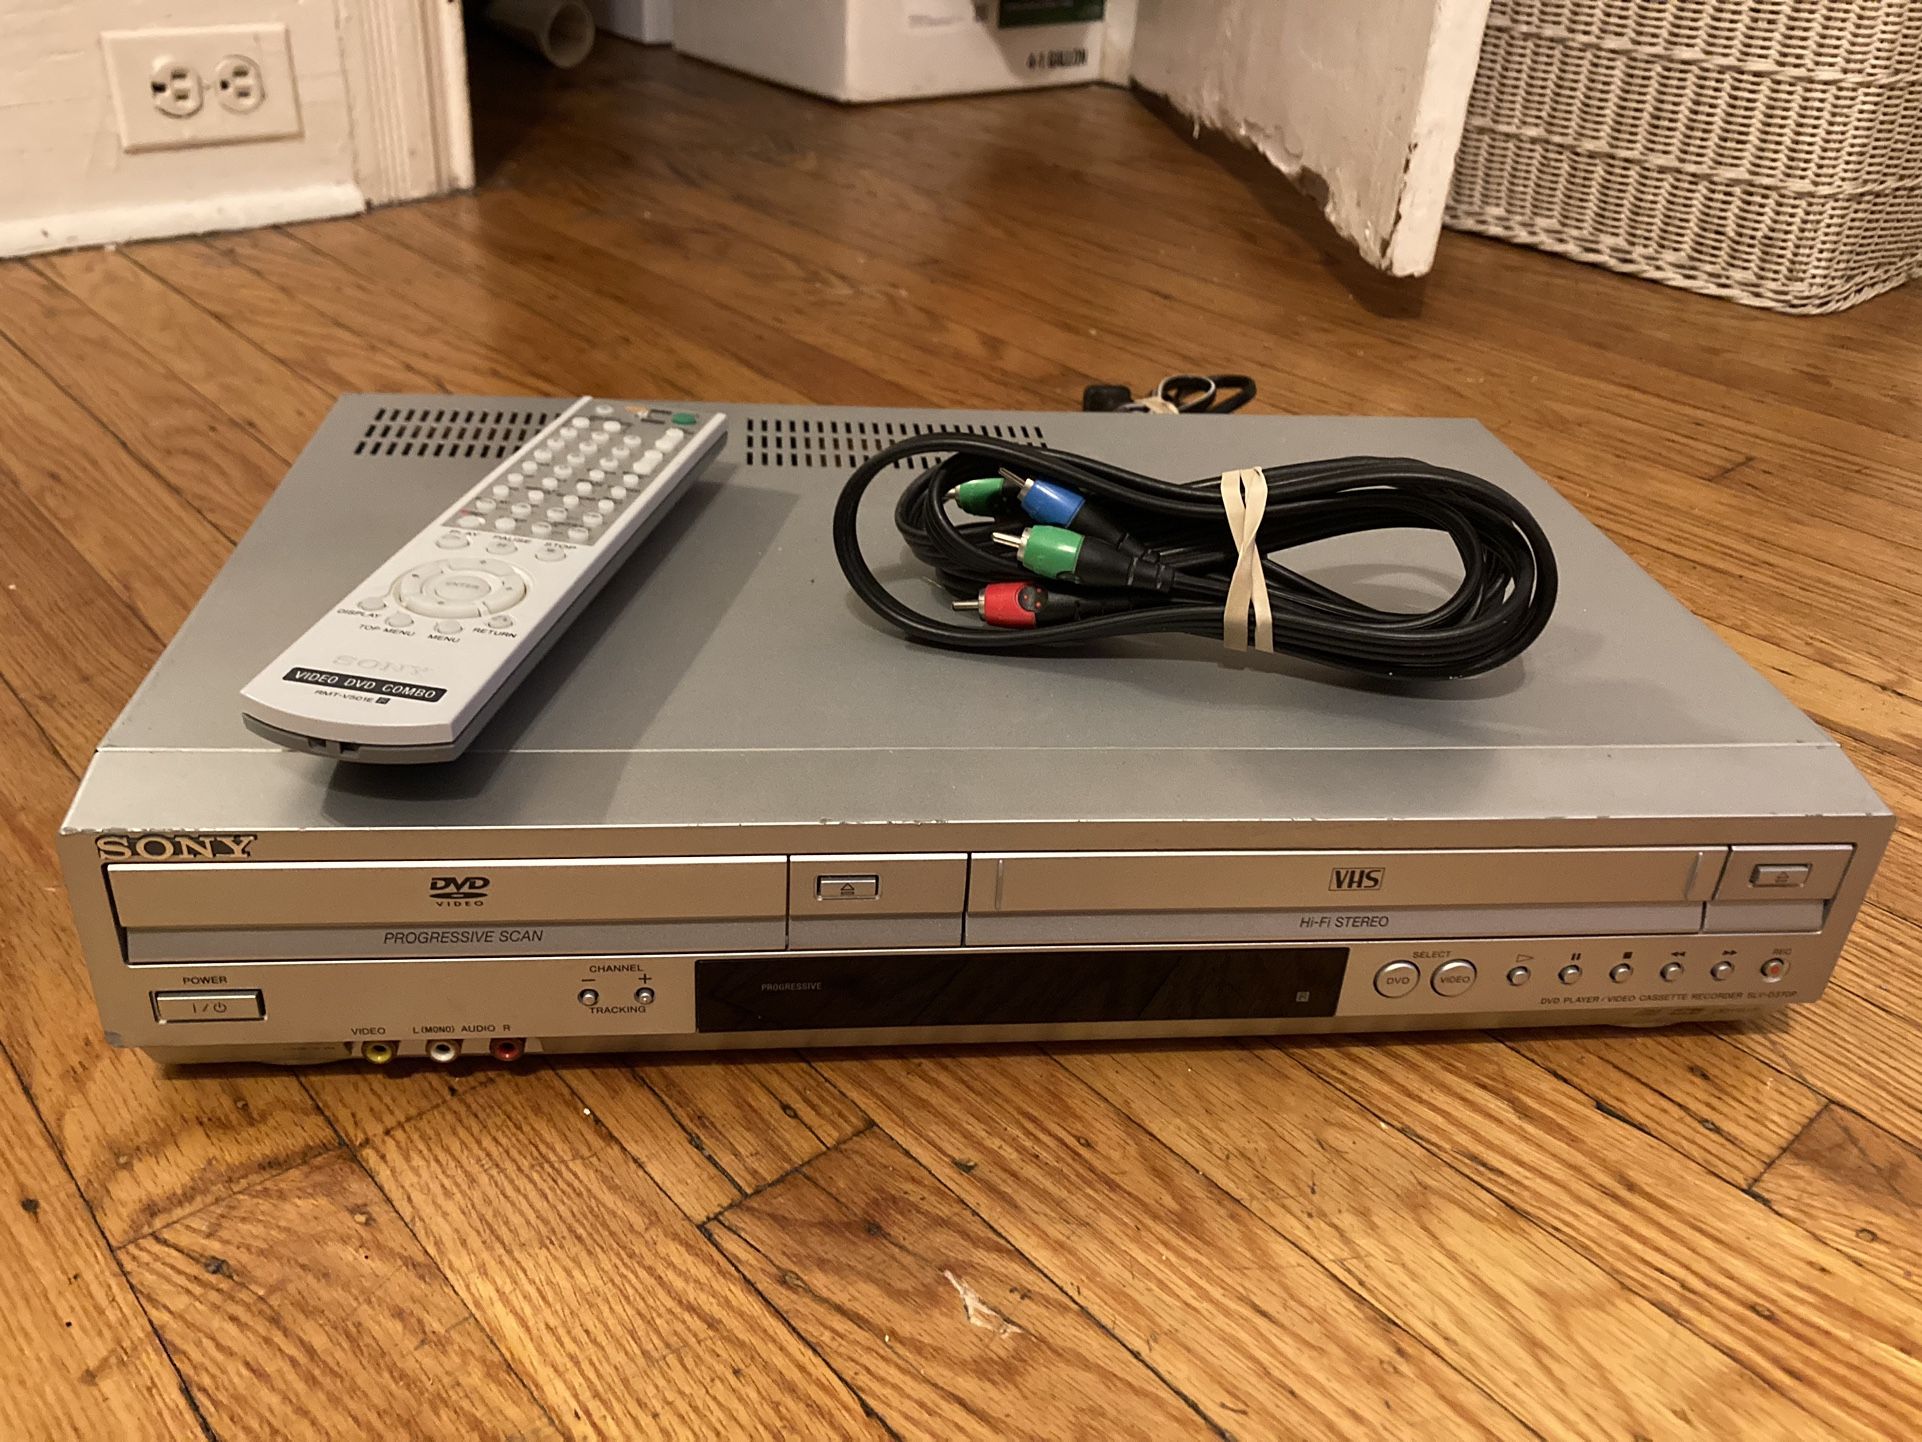 Sony DVD PLAYER / VIDEO CASSETTE RECORDER SLV-D370P with original remote VCR VHS TESTED